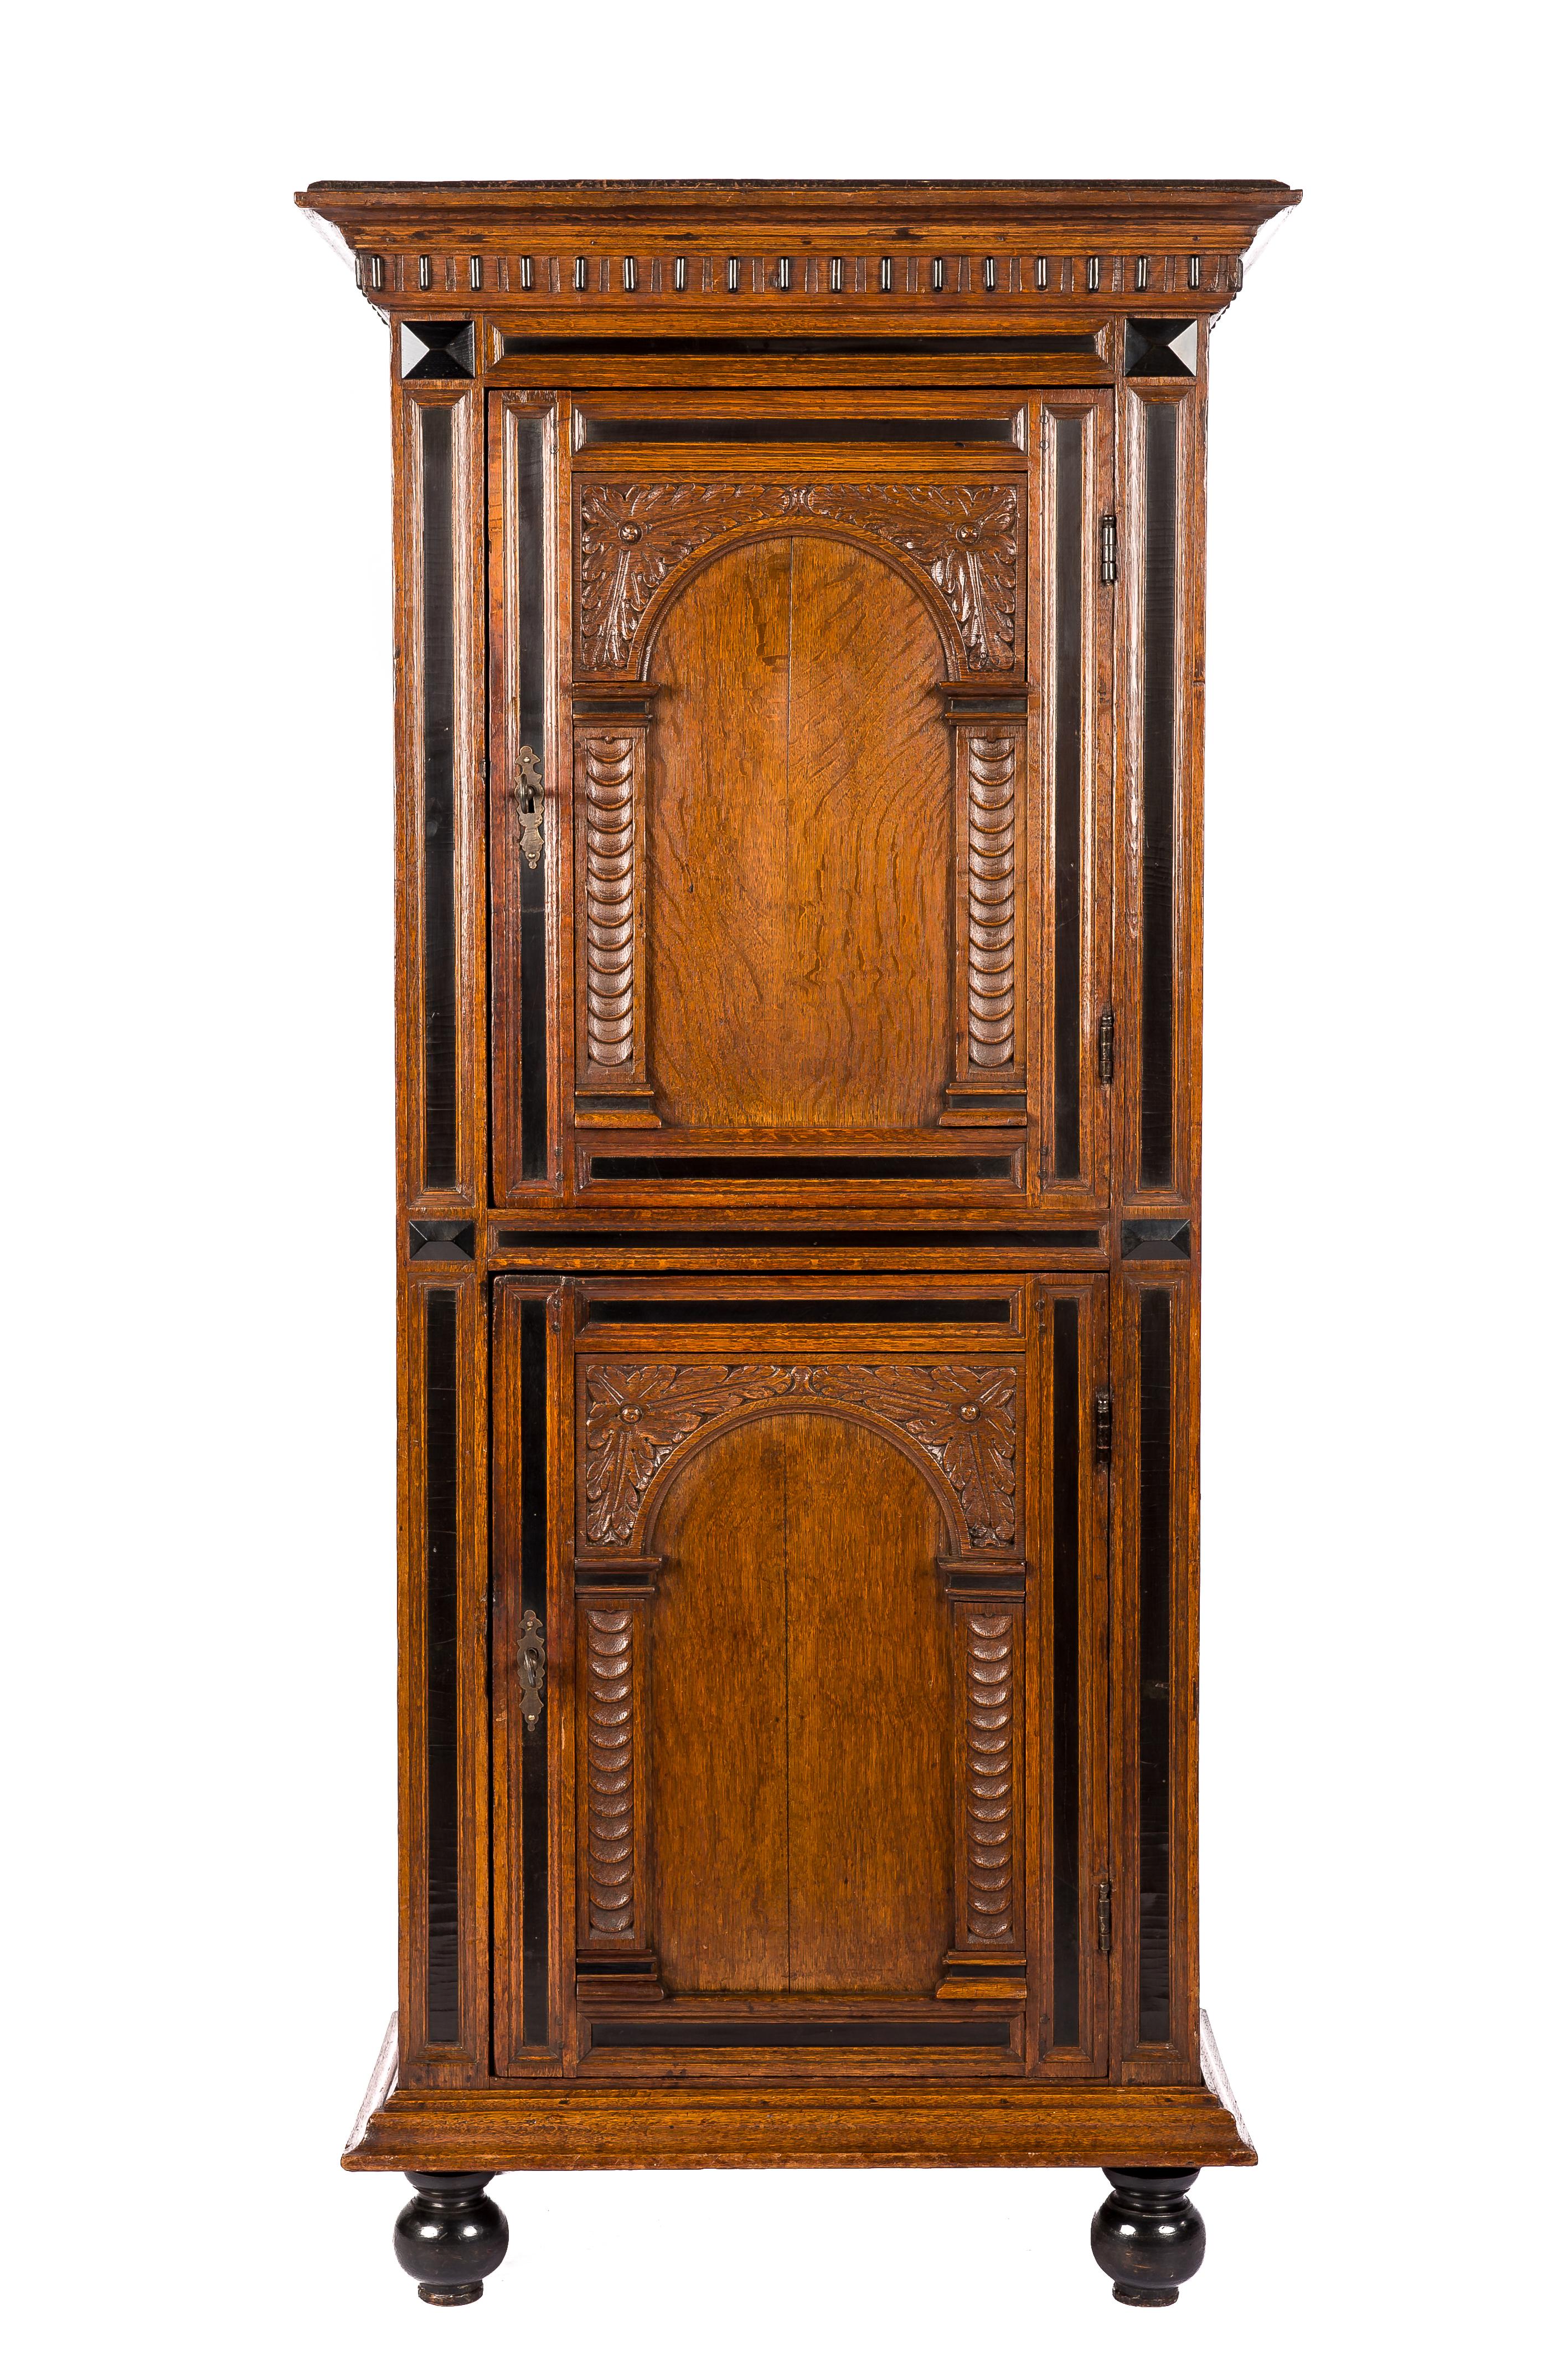 This extraordinary and unique cupboard is made of the finest quarter-sawn oak in the tradition of the Dutch Renaissance during the “Dutch golden age”. It is a relatively small and narrow two-door cabinet with arched doors on top of each other and